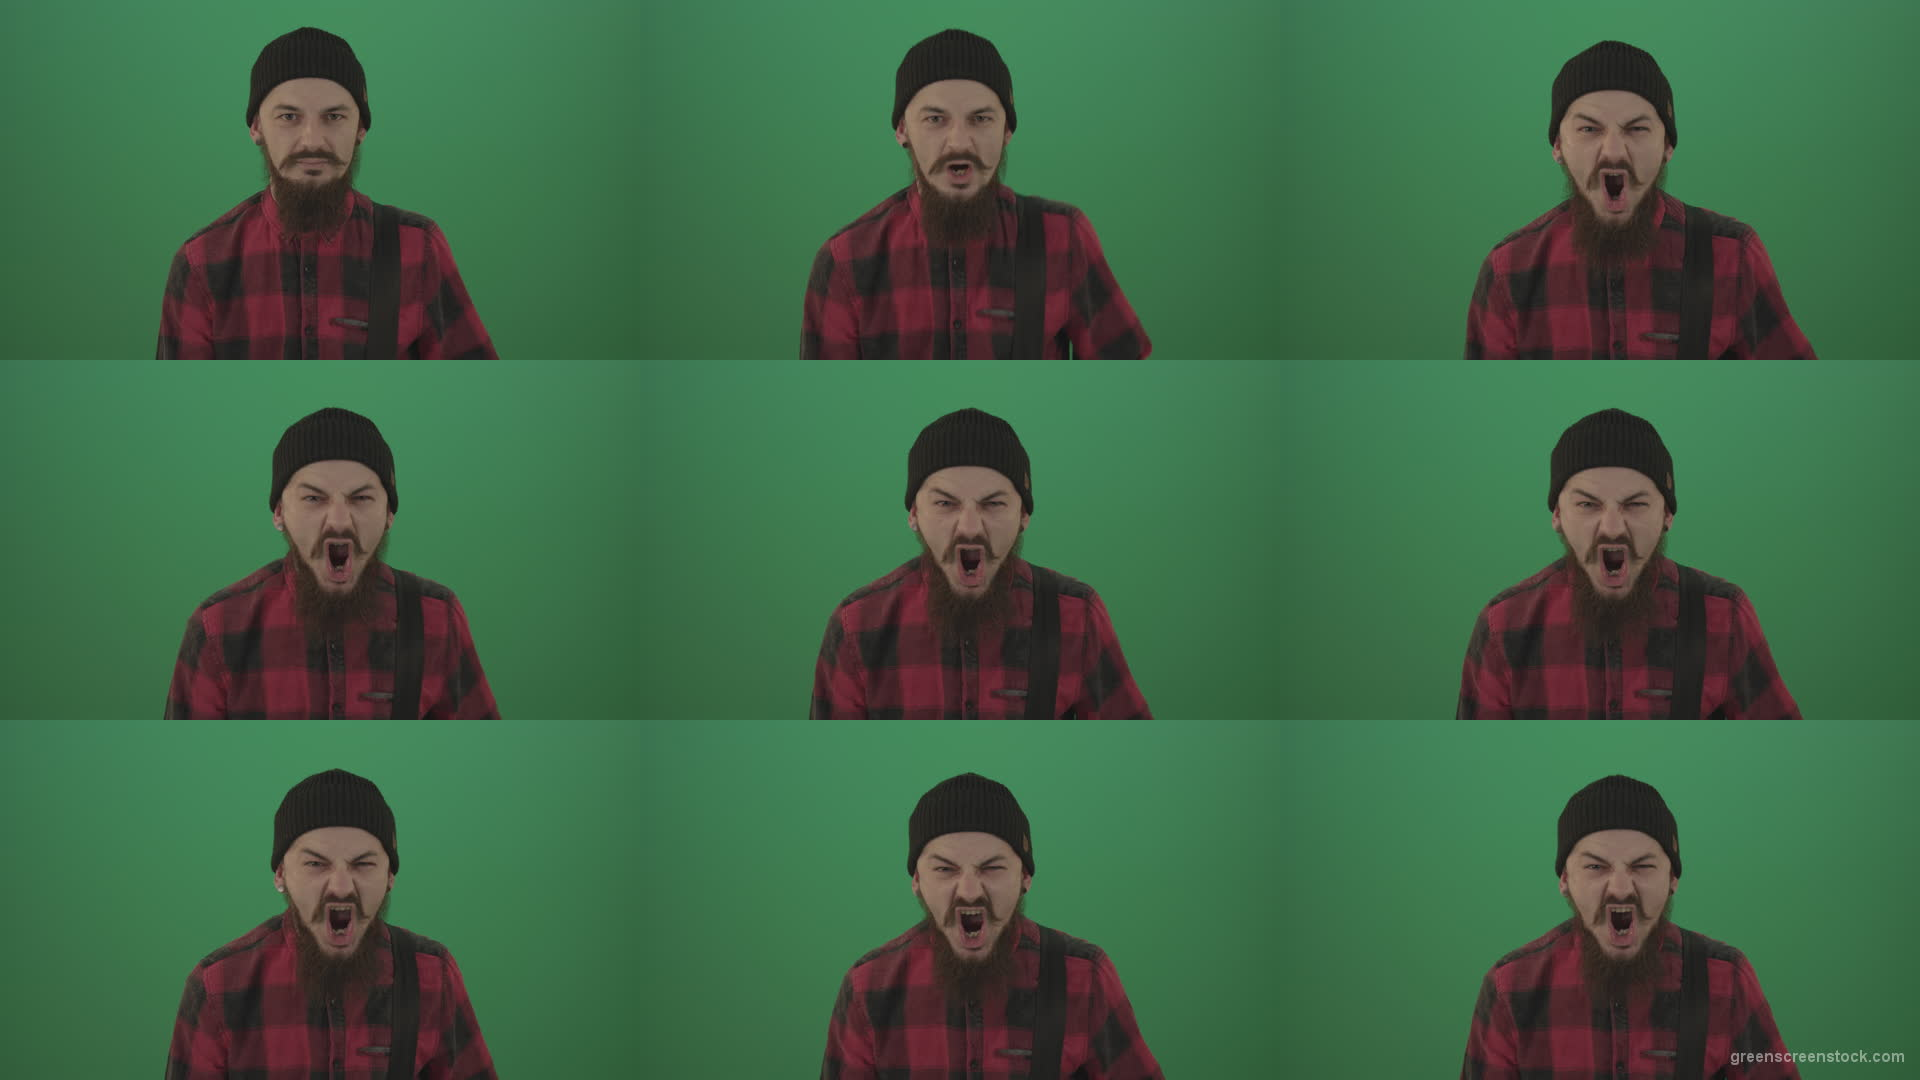 Punk-rocker-man-with-beard-and-red-shirt-screaming-feels-pain-isolated-on-green-screen-background Green Screen Stock